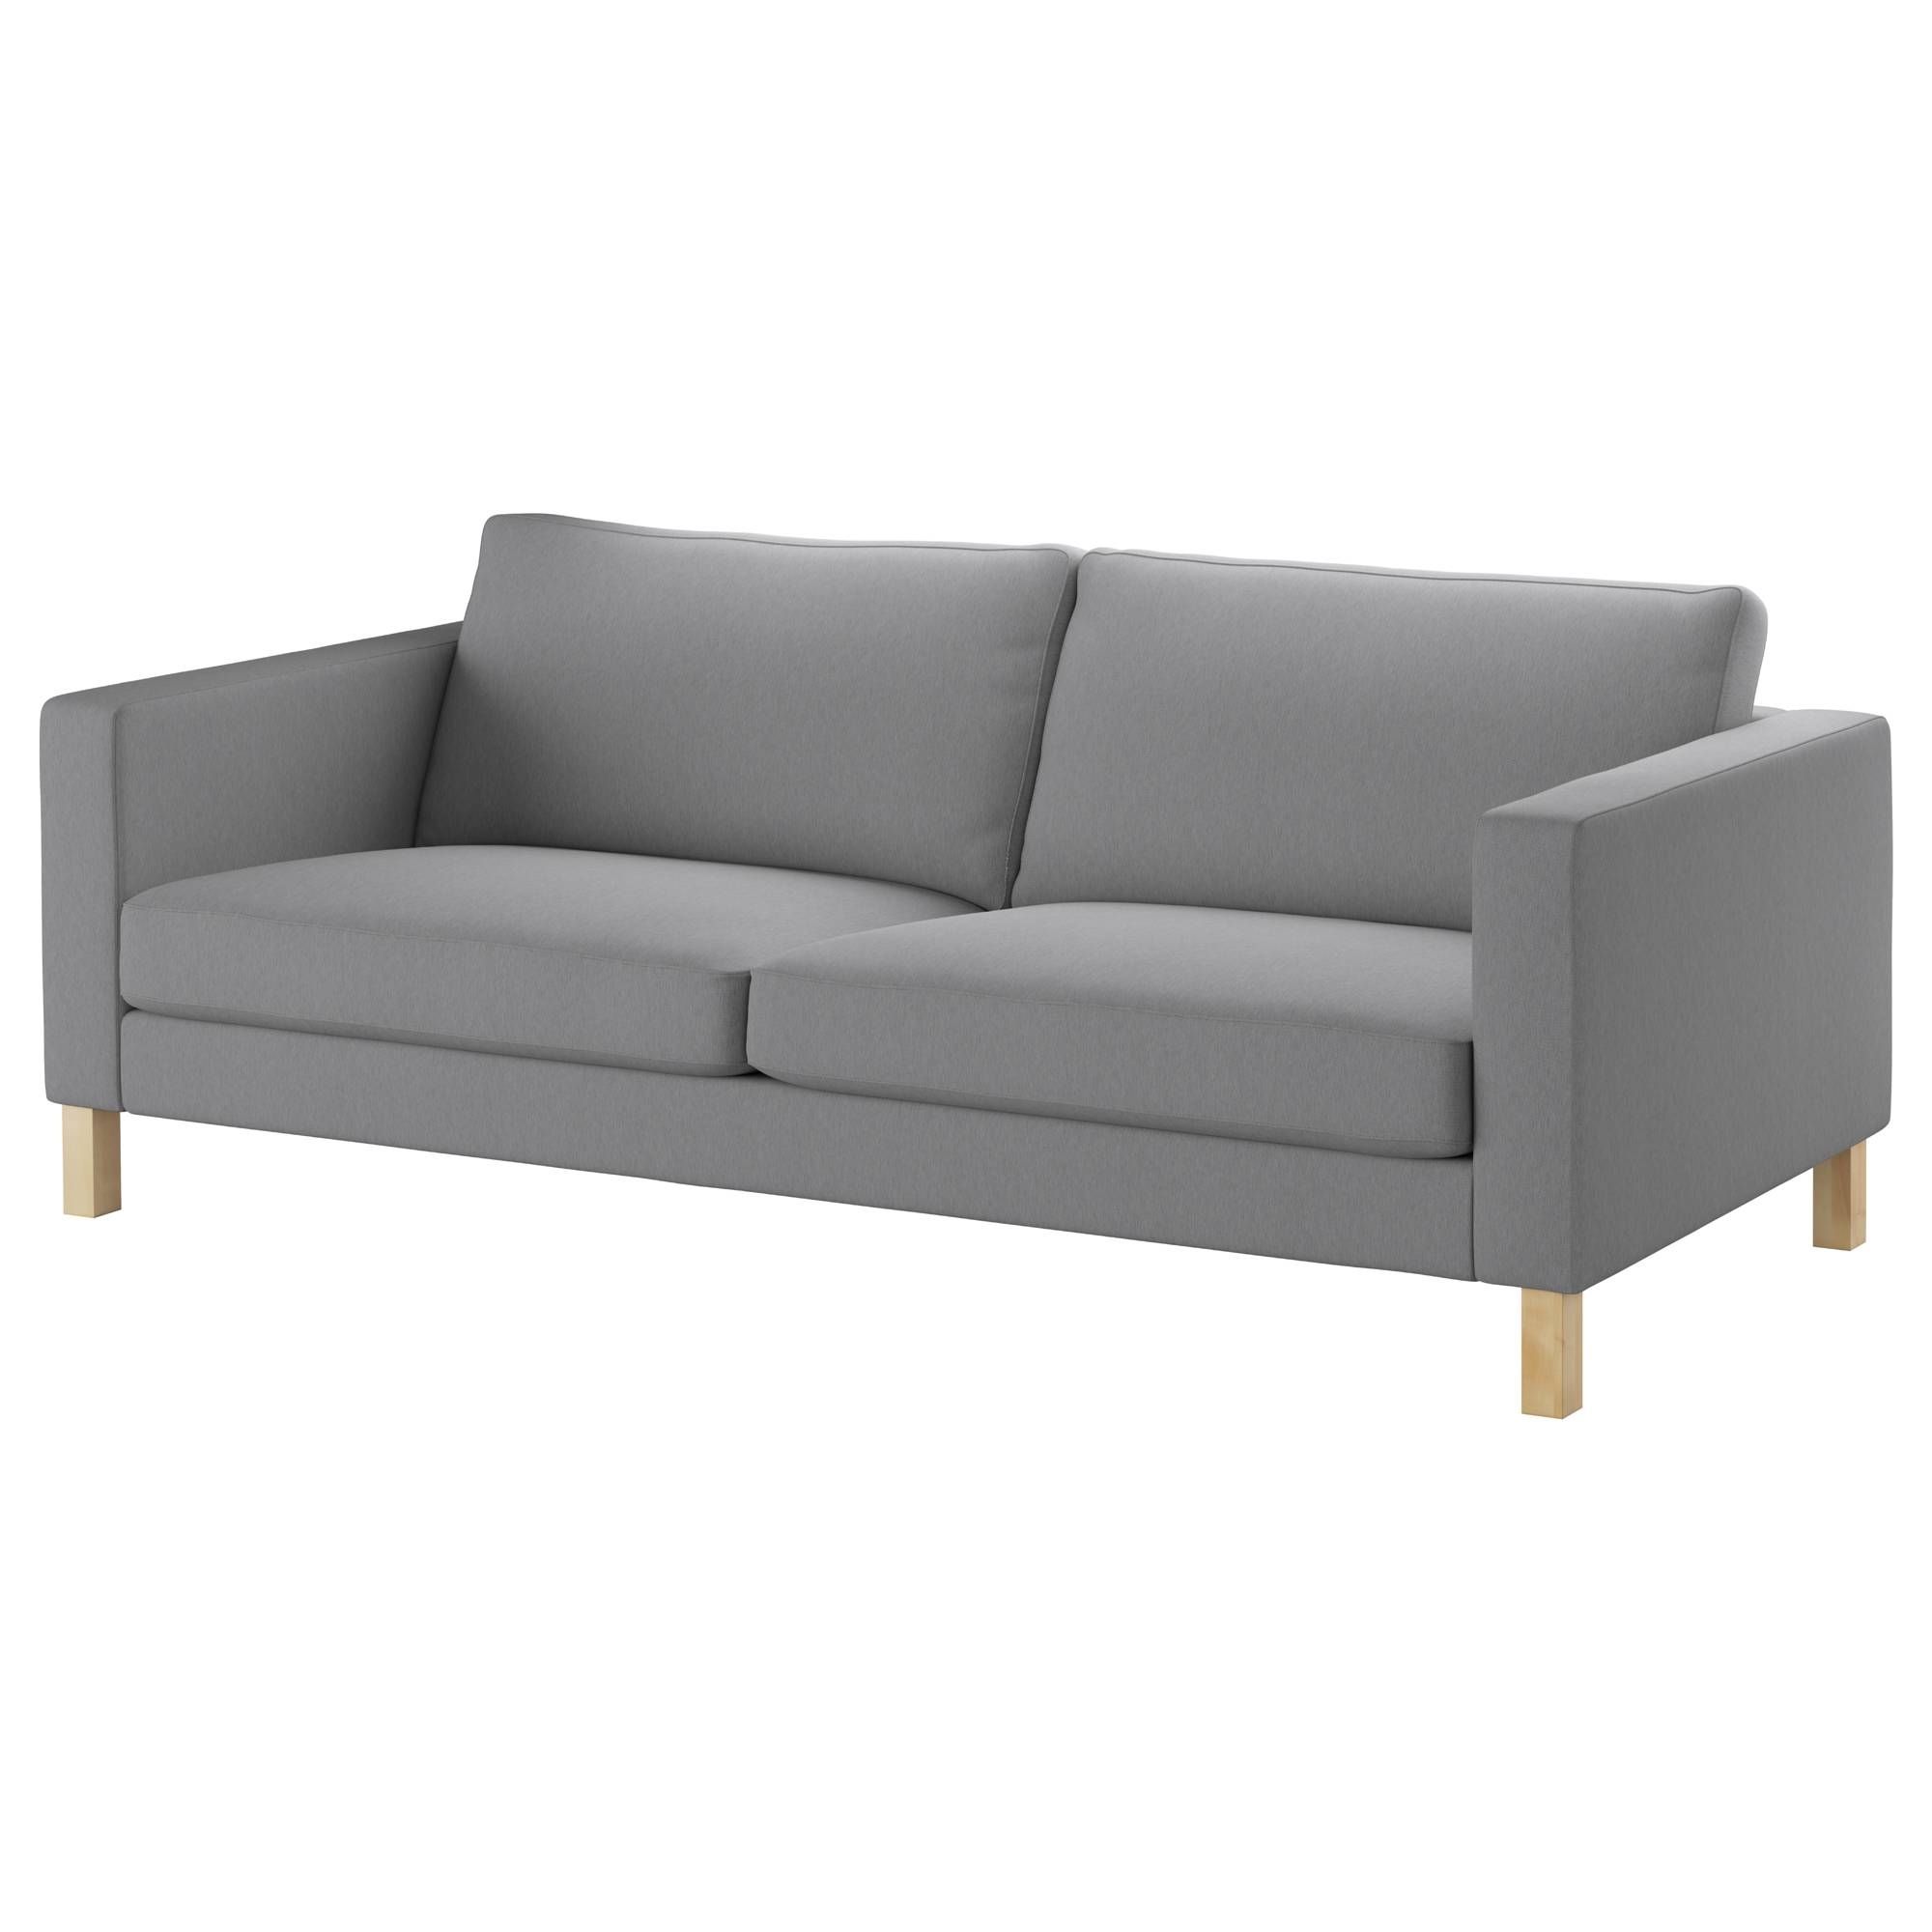 Sofa Covers – Ikea For Covers For Sofas (View 20 of 30)